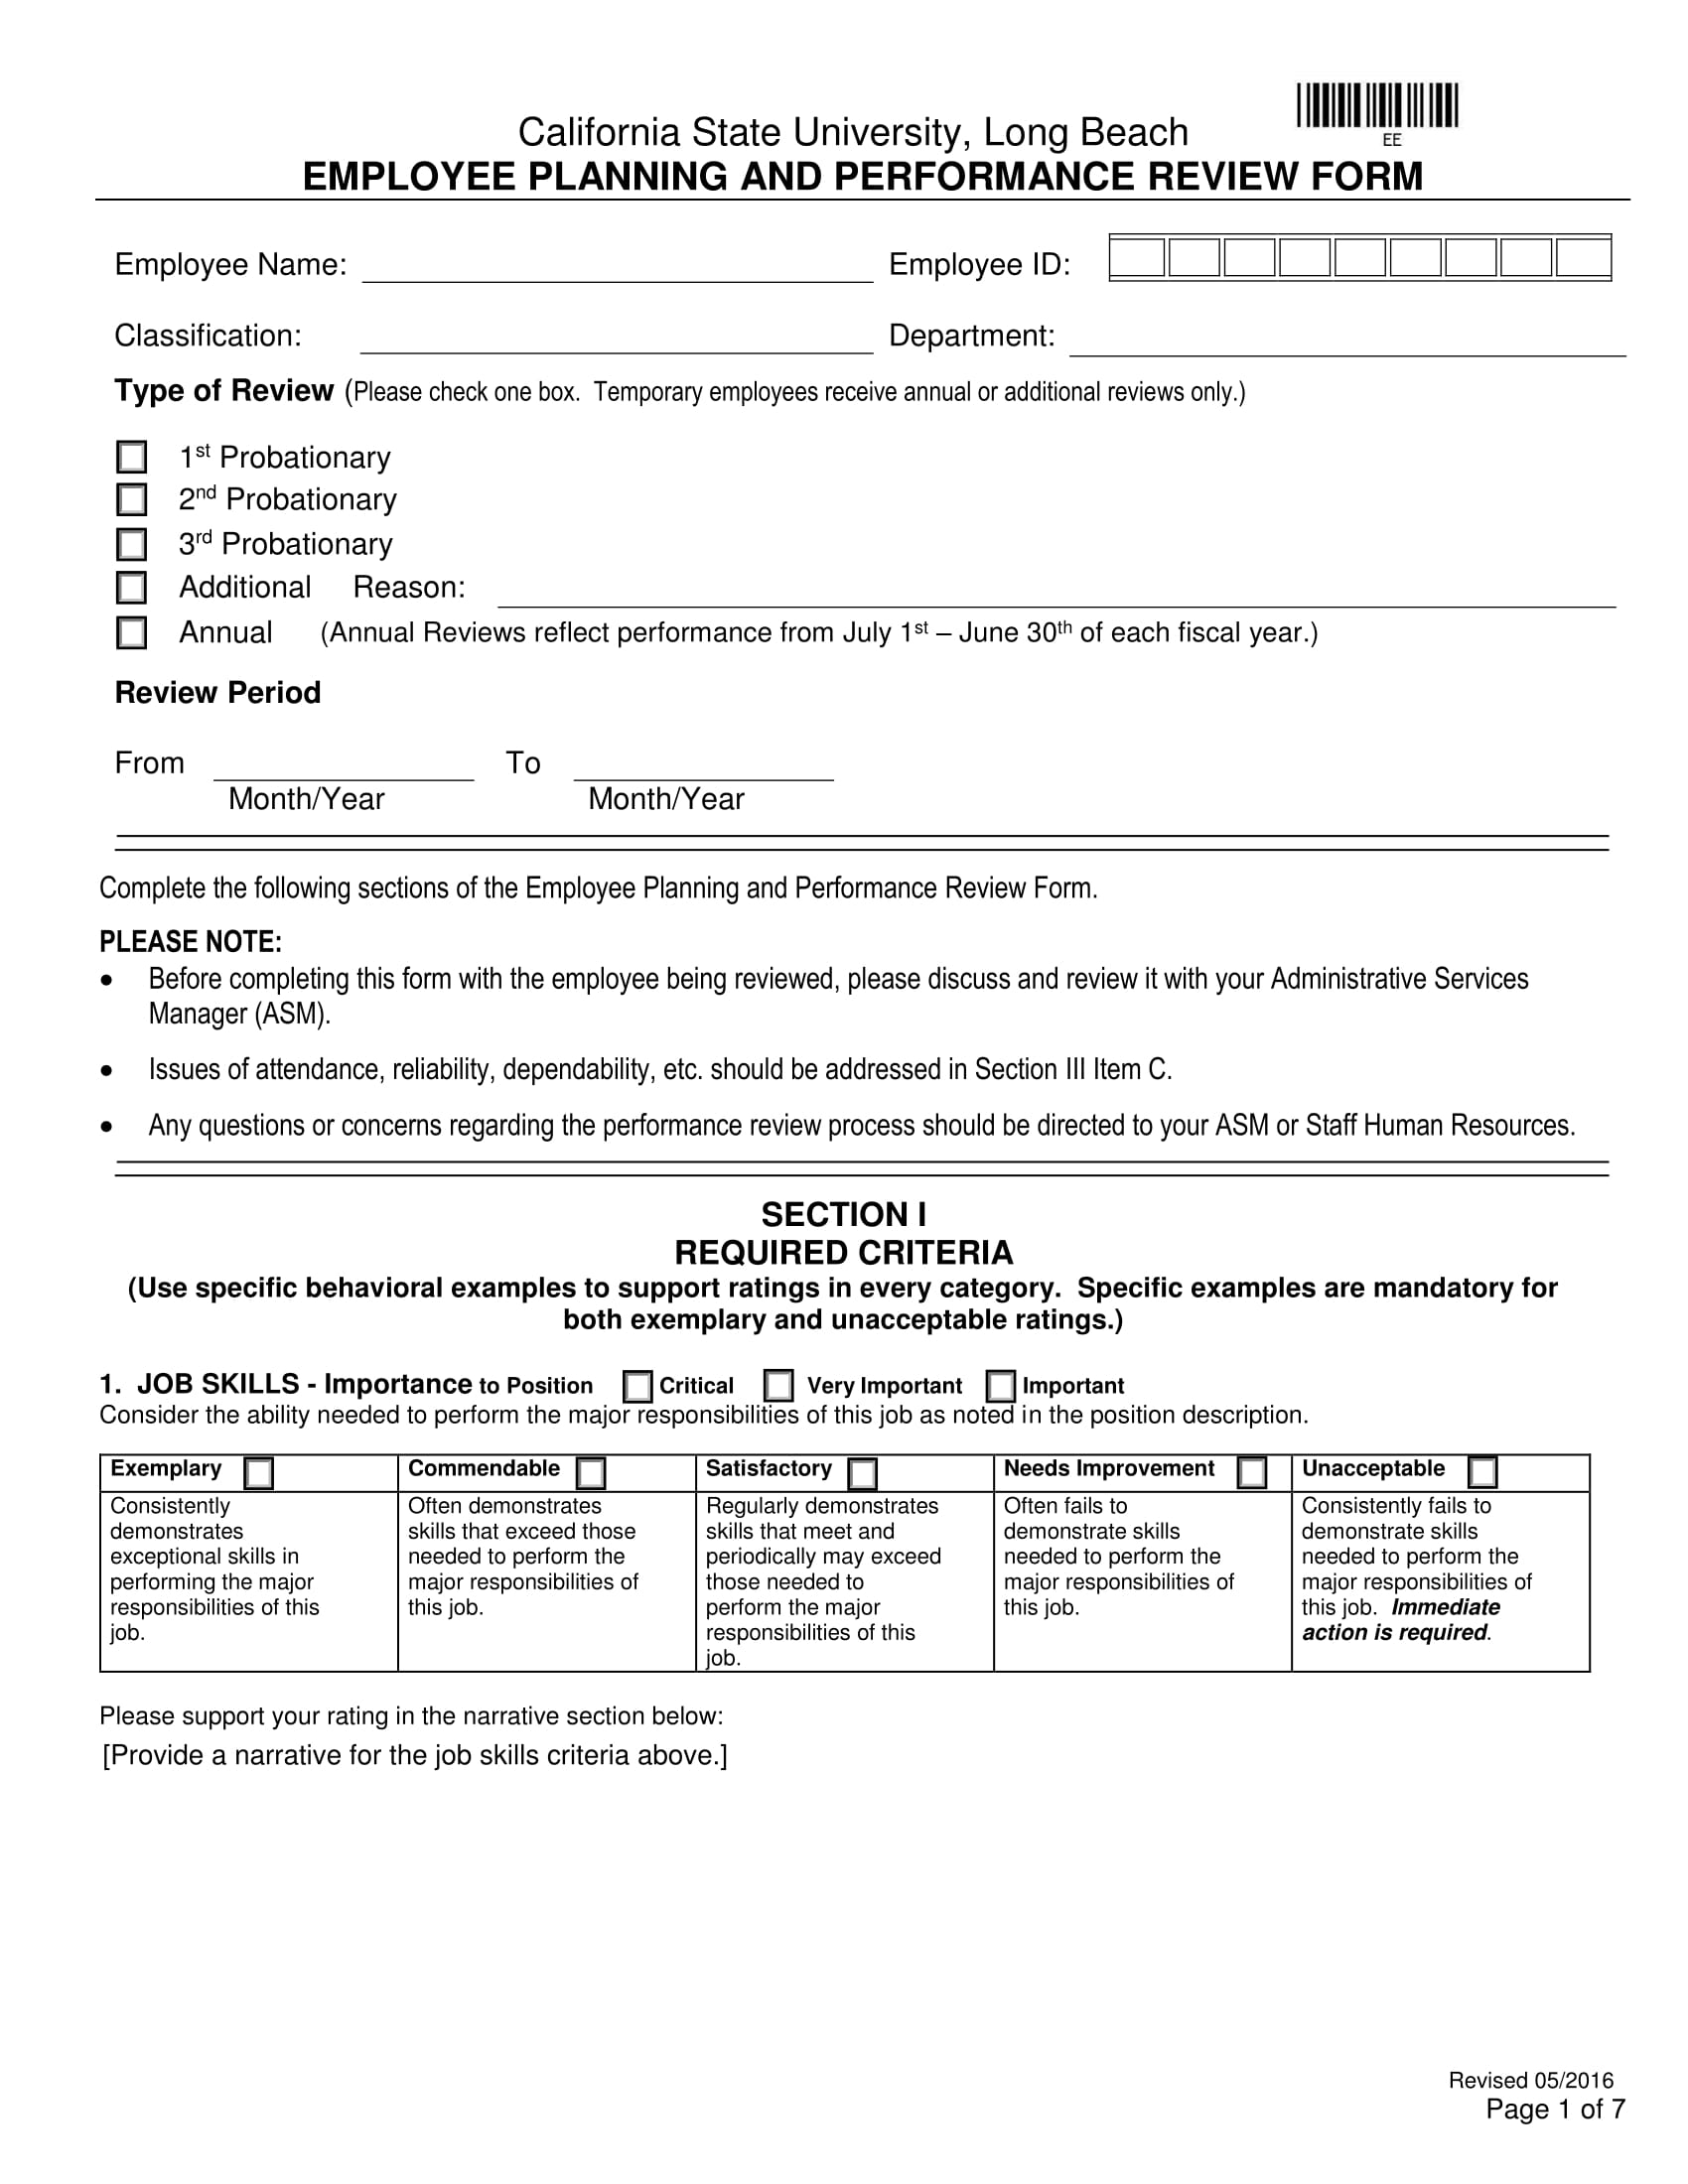 employee planning and performance review form 1